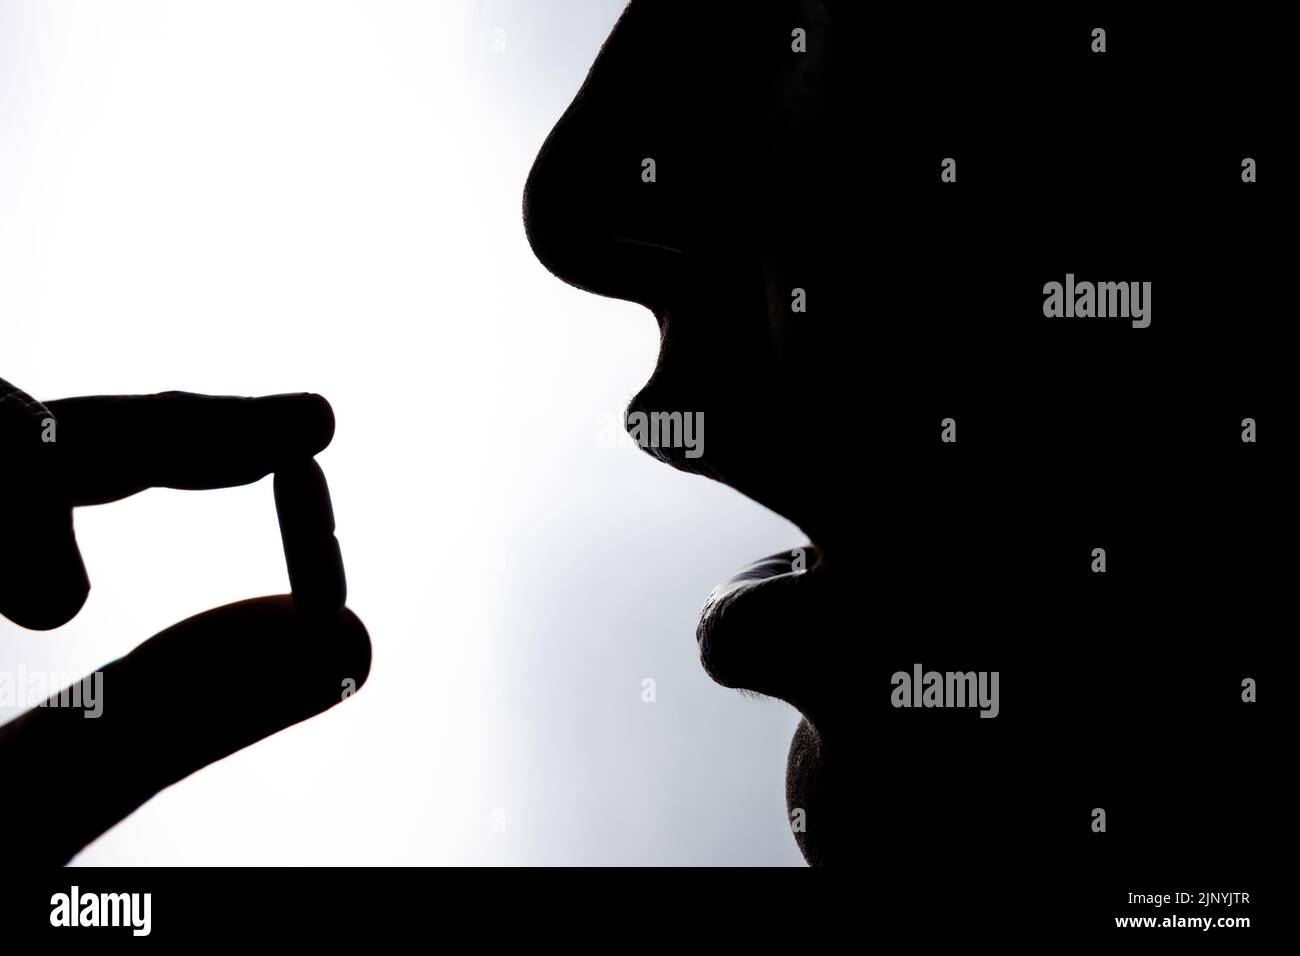 Taking pill. Silhouette of a unrecognizable woman taking a pill or drug. Healthcare or medicine or wellness or taking vitamins or recovering from illn Stock Photo